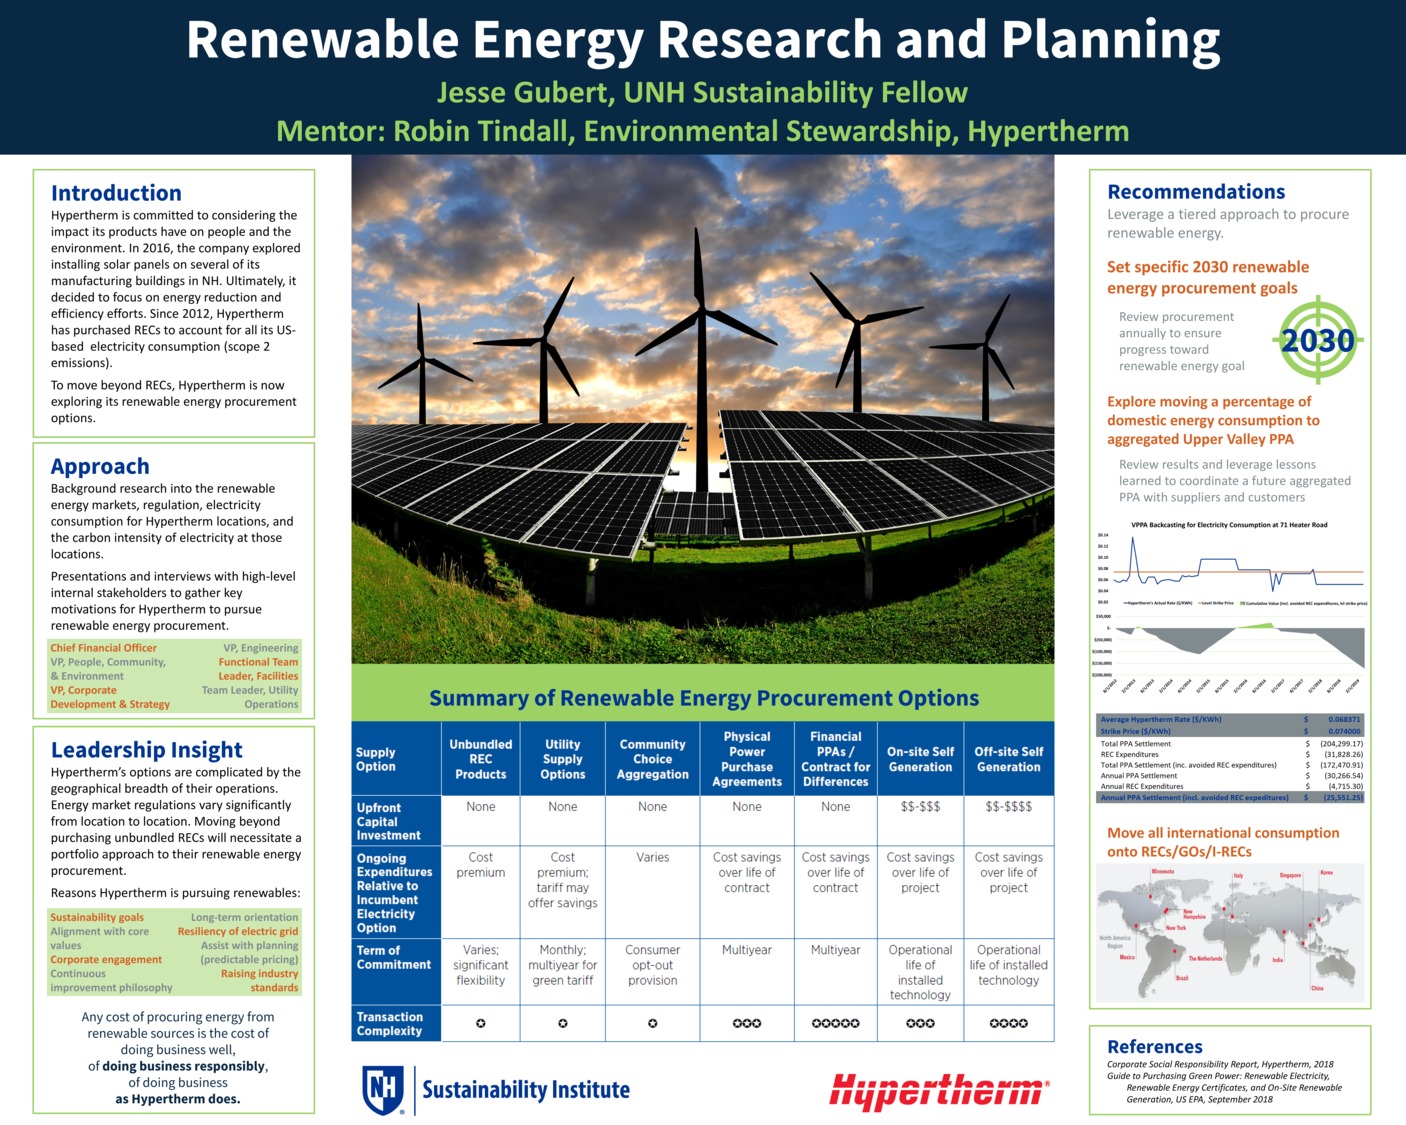 Renewable Energy Research And Planning_Final Poster by jdgubert